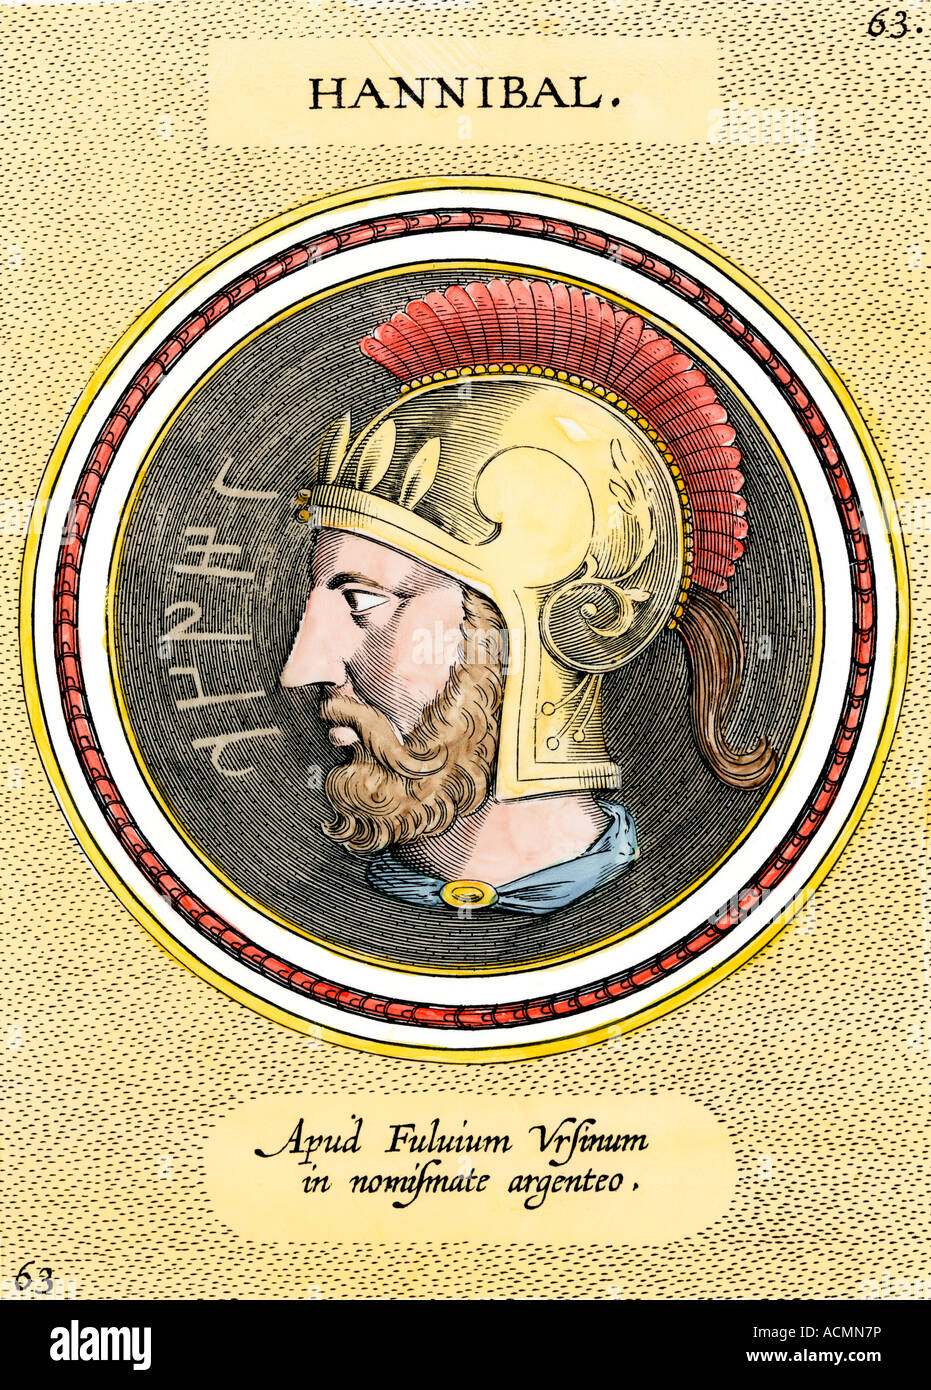 Hannibal the Carthaginian general who invaded Italy and defeated the ancient Roman army. Hand-colored etching Stock Photo